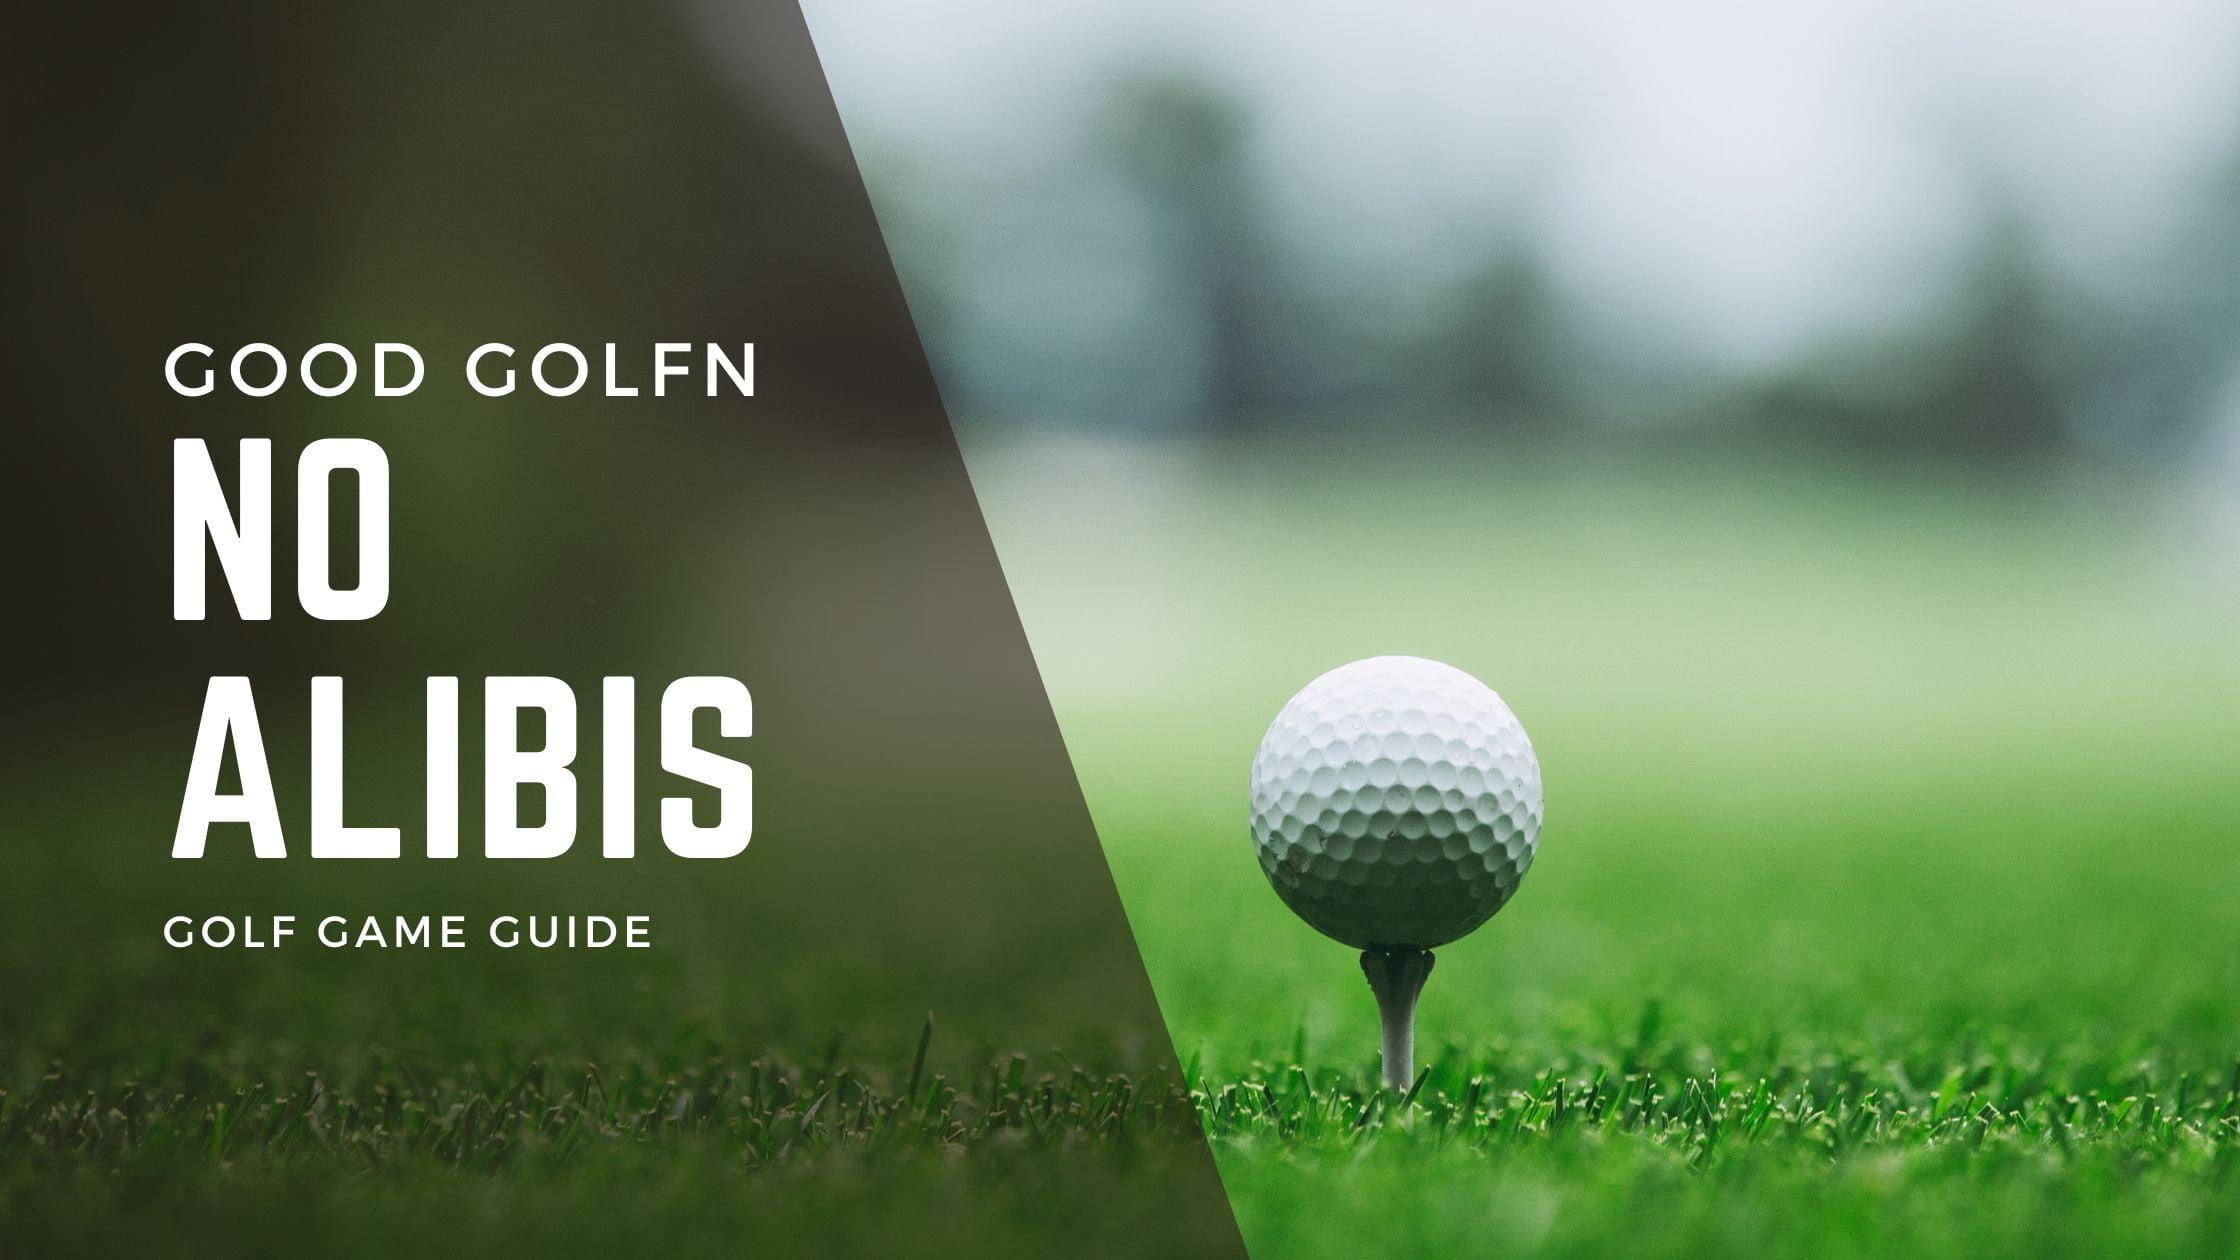 Dive into the captivating world of golf formats like no alibis, mulligan tournaments, and team scoring strategies. Master the game with expert tips and trivia!